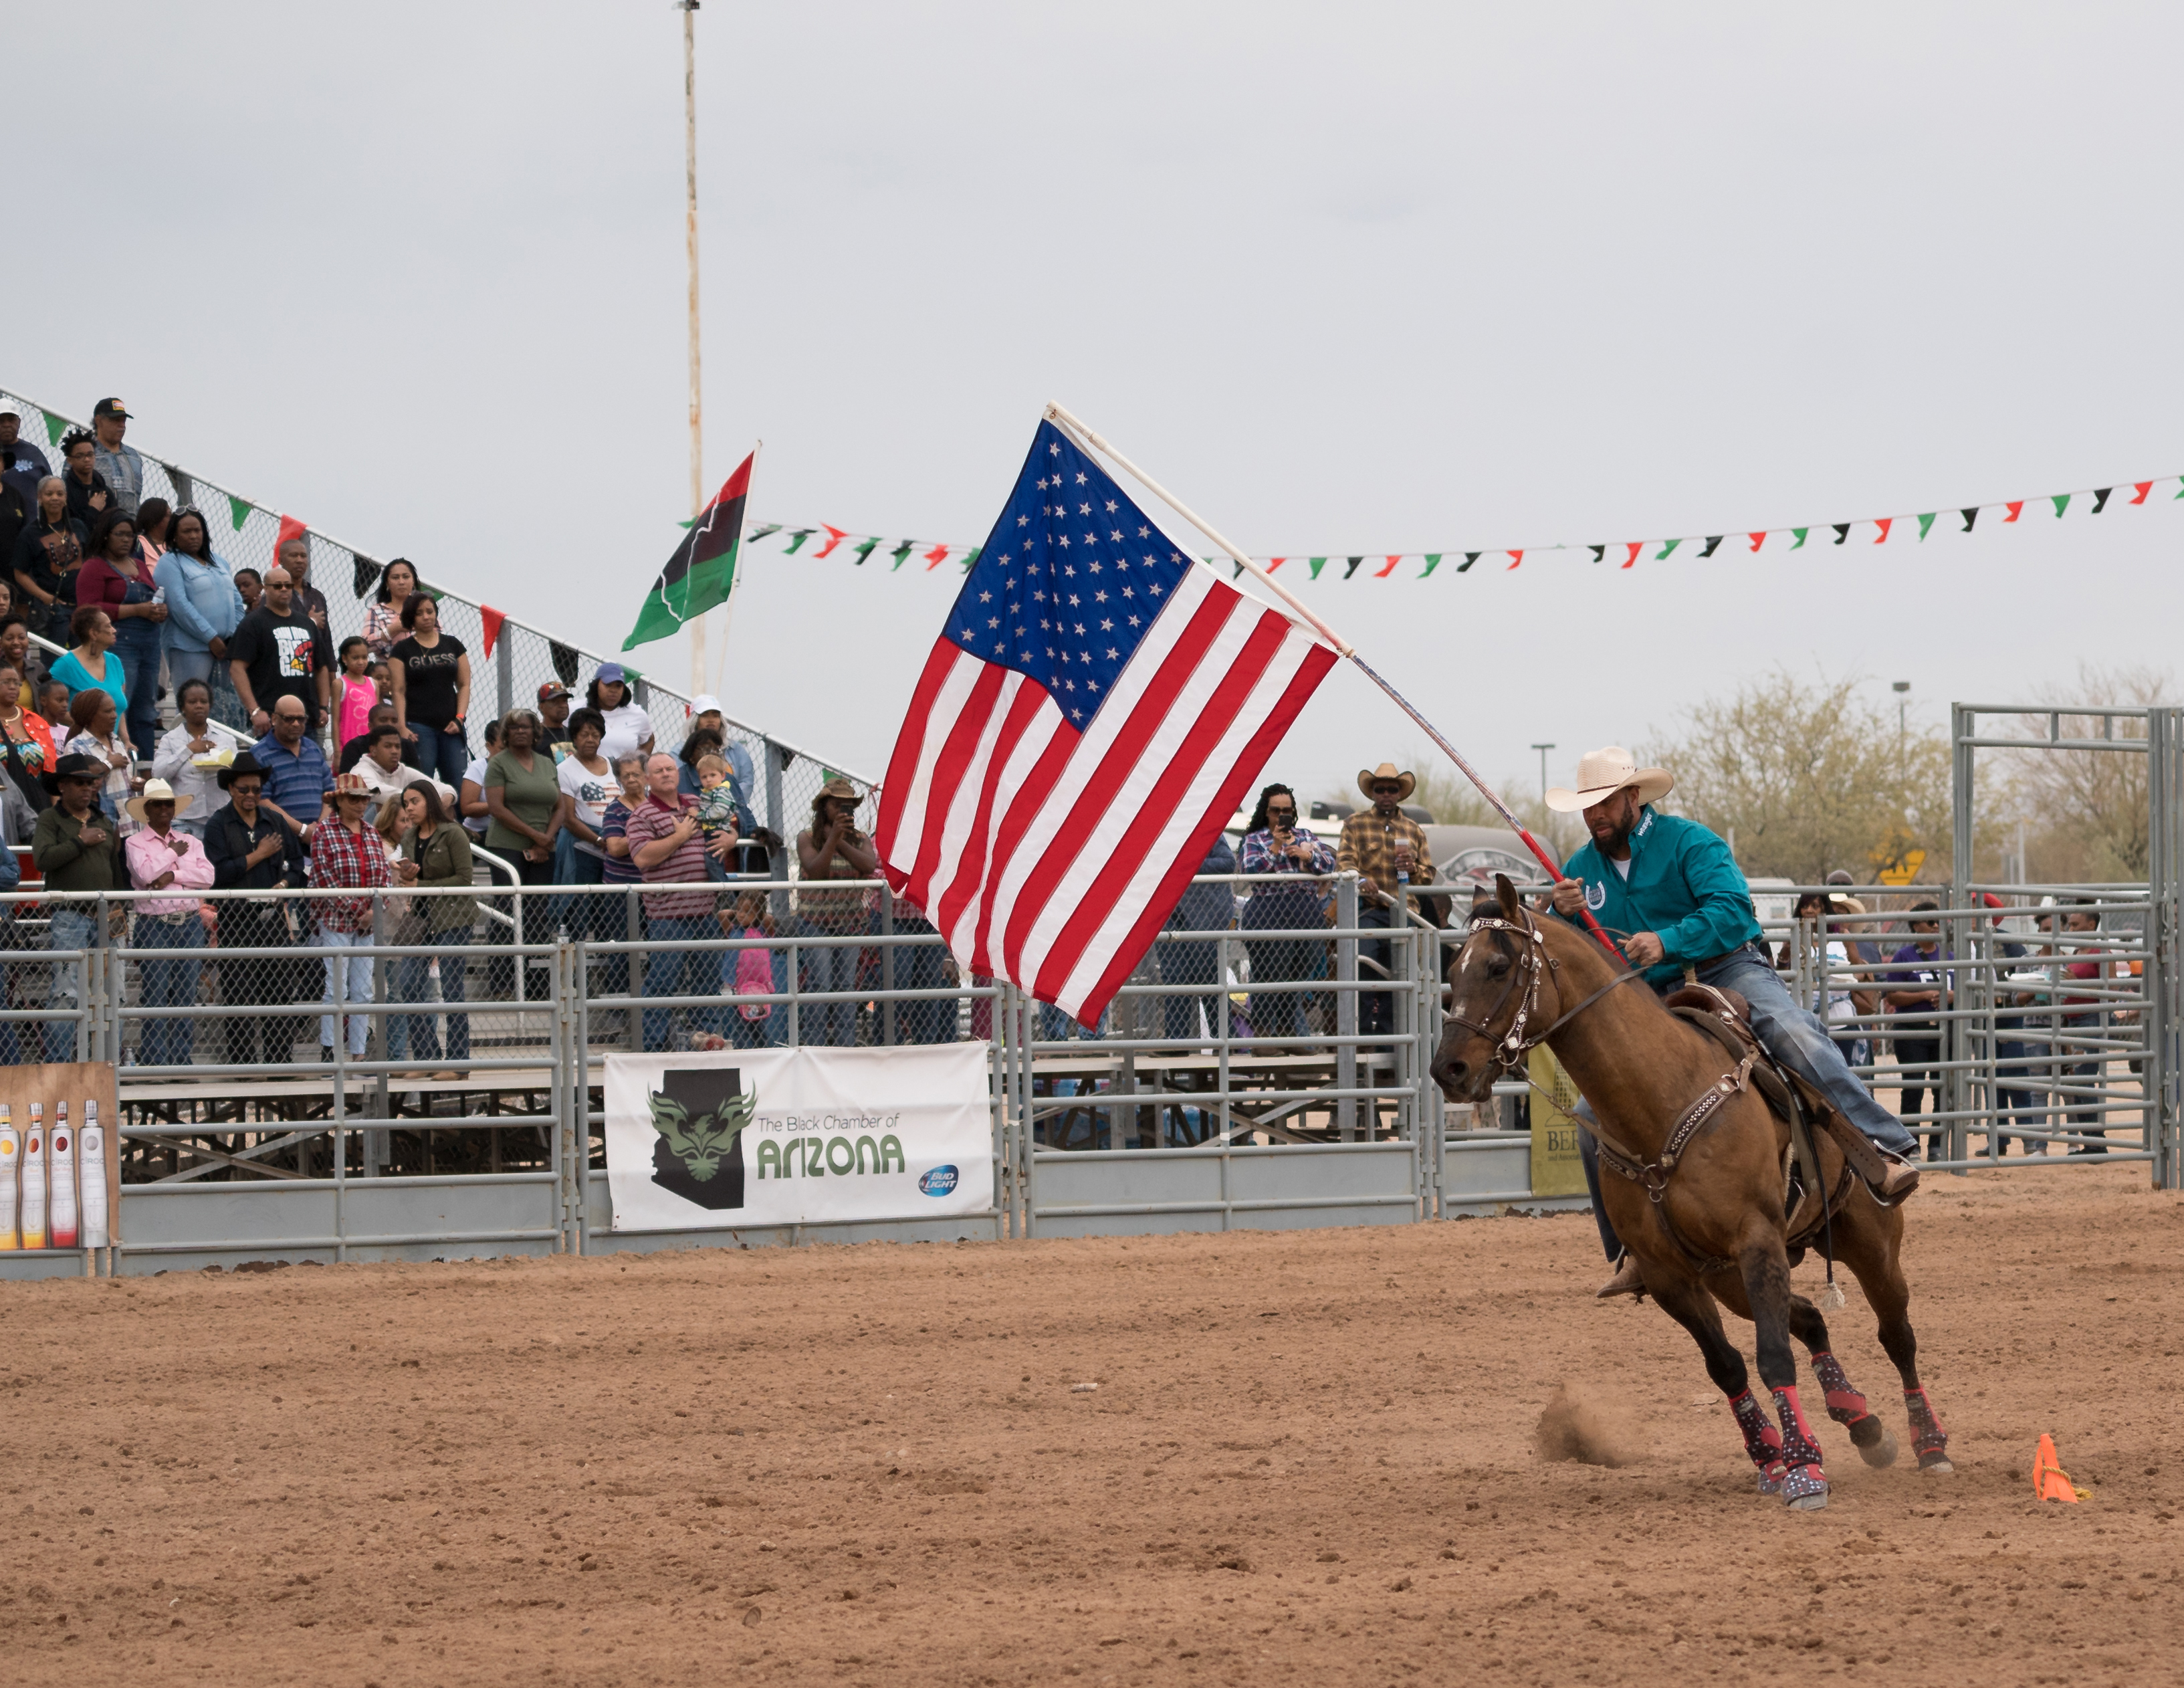 Round Up Your Family and Friends for the 2022 Arizona Black Rodeo in Scottsdale on September 2-3